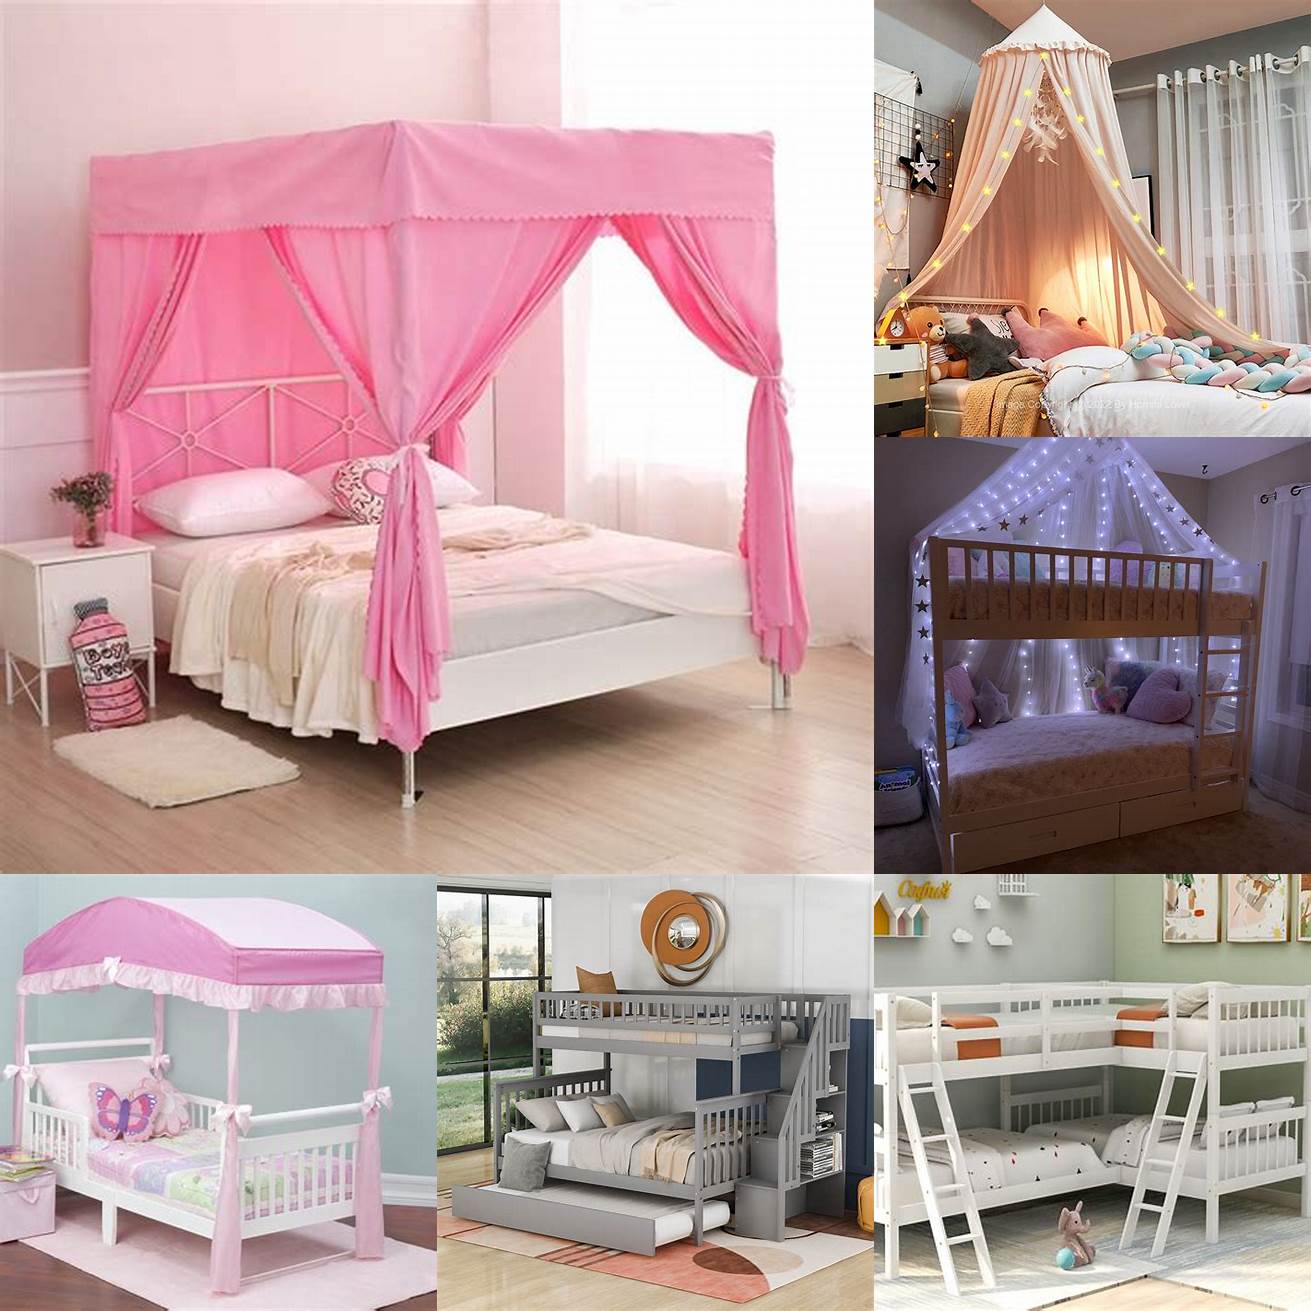 2 Full size kids bed with canopy